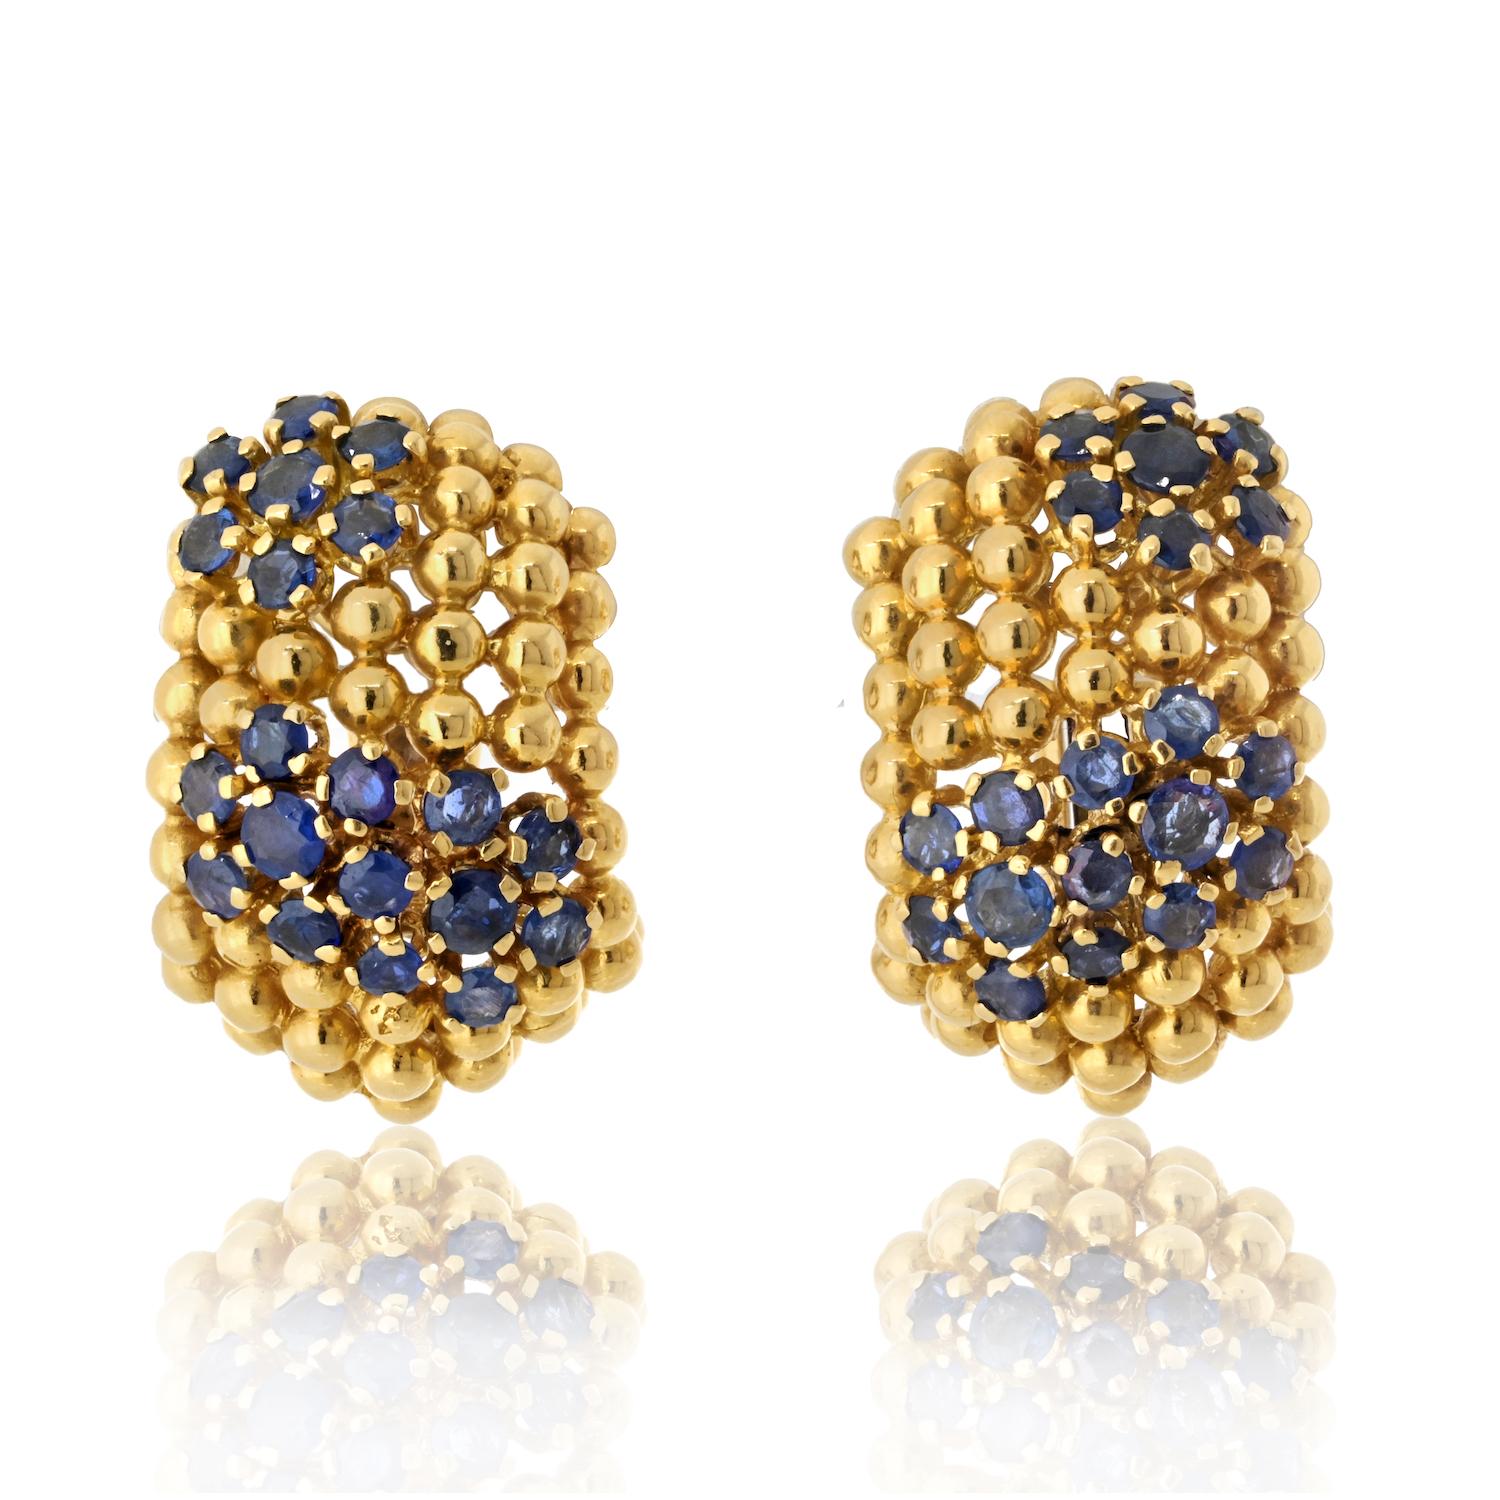 The description you provided sounds absolutely stunning! The combination of genuine retro design from Tiffany & Co., 18 karat solid yellow gold, and round Natural Ceylon Sapphires totaling 1.50 carats must make for a truly exquisite pair of